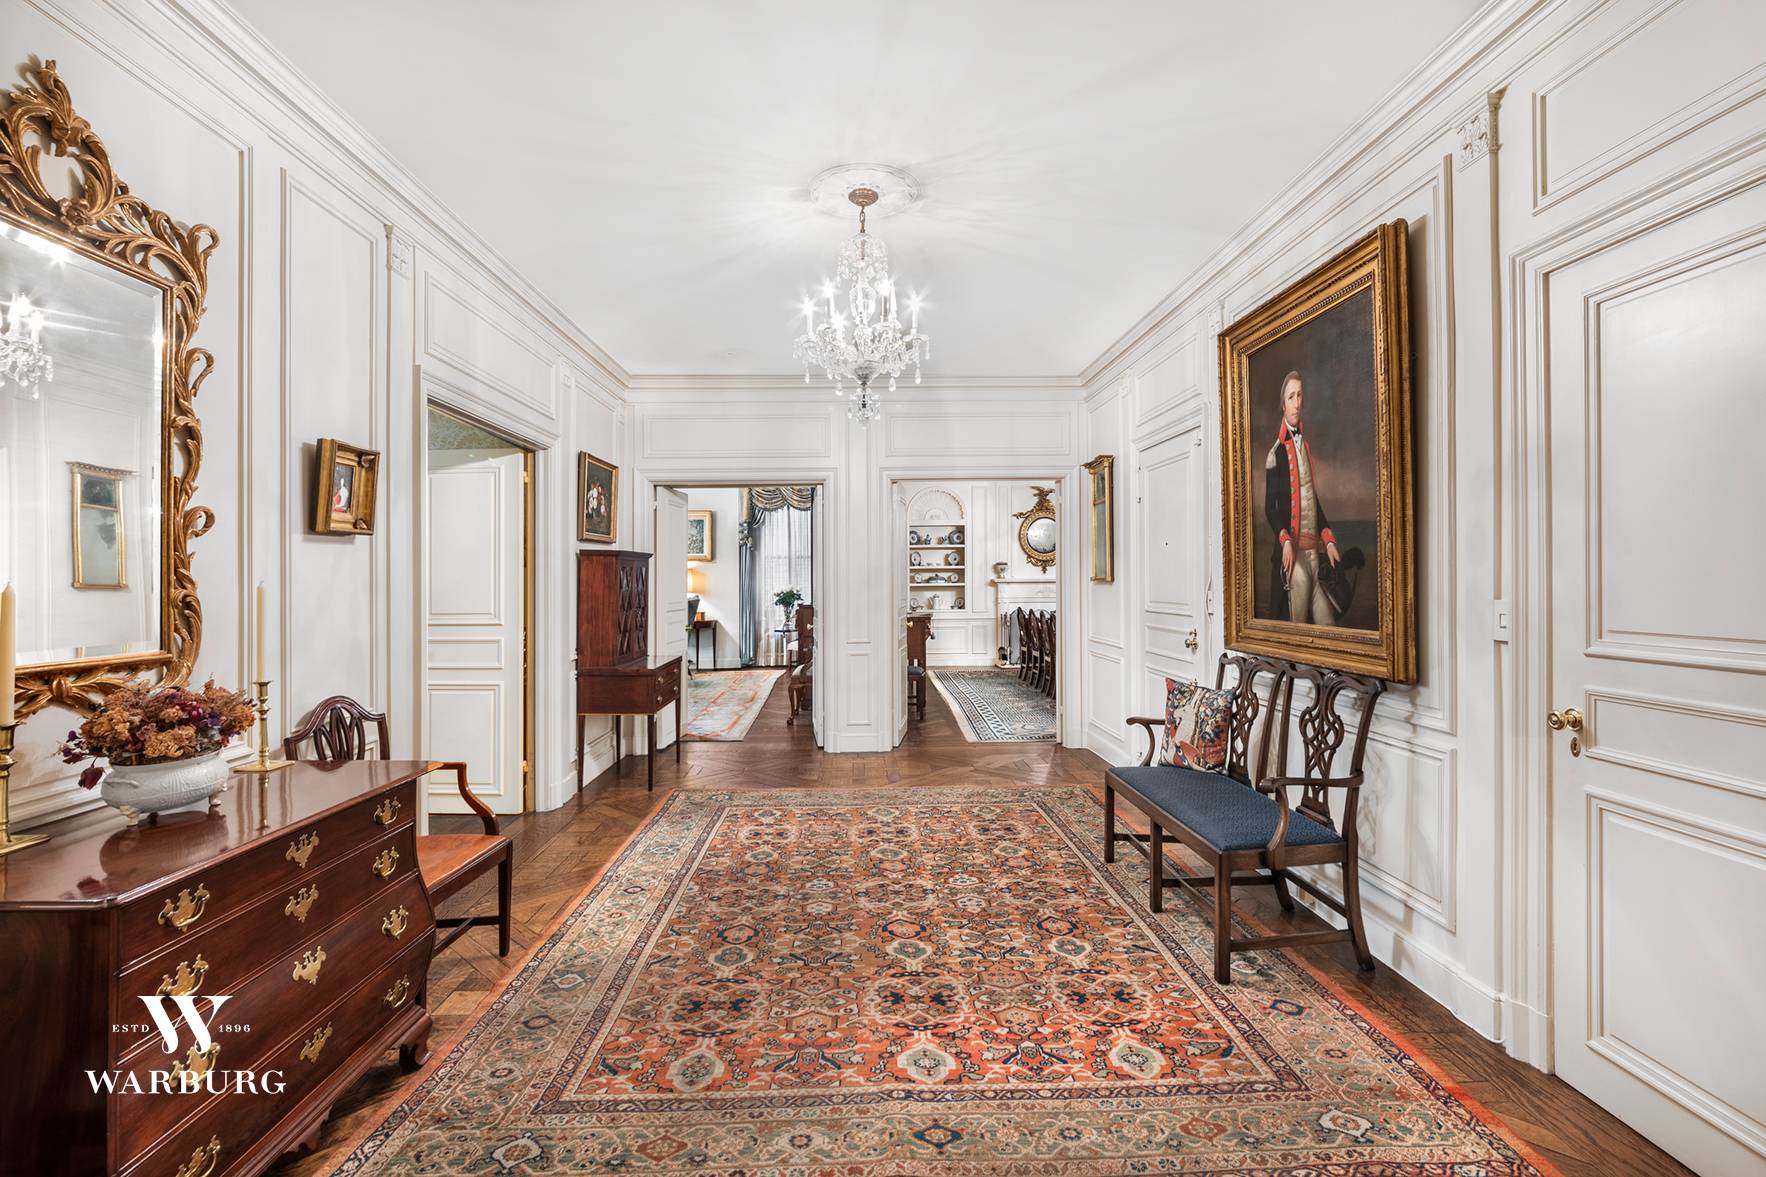 Mansion scaled rooms adorn this exquisite and sumptuous offering in an AAA Park Avenue building.